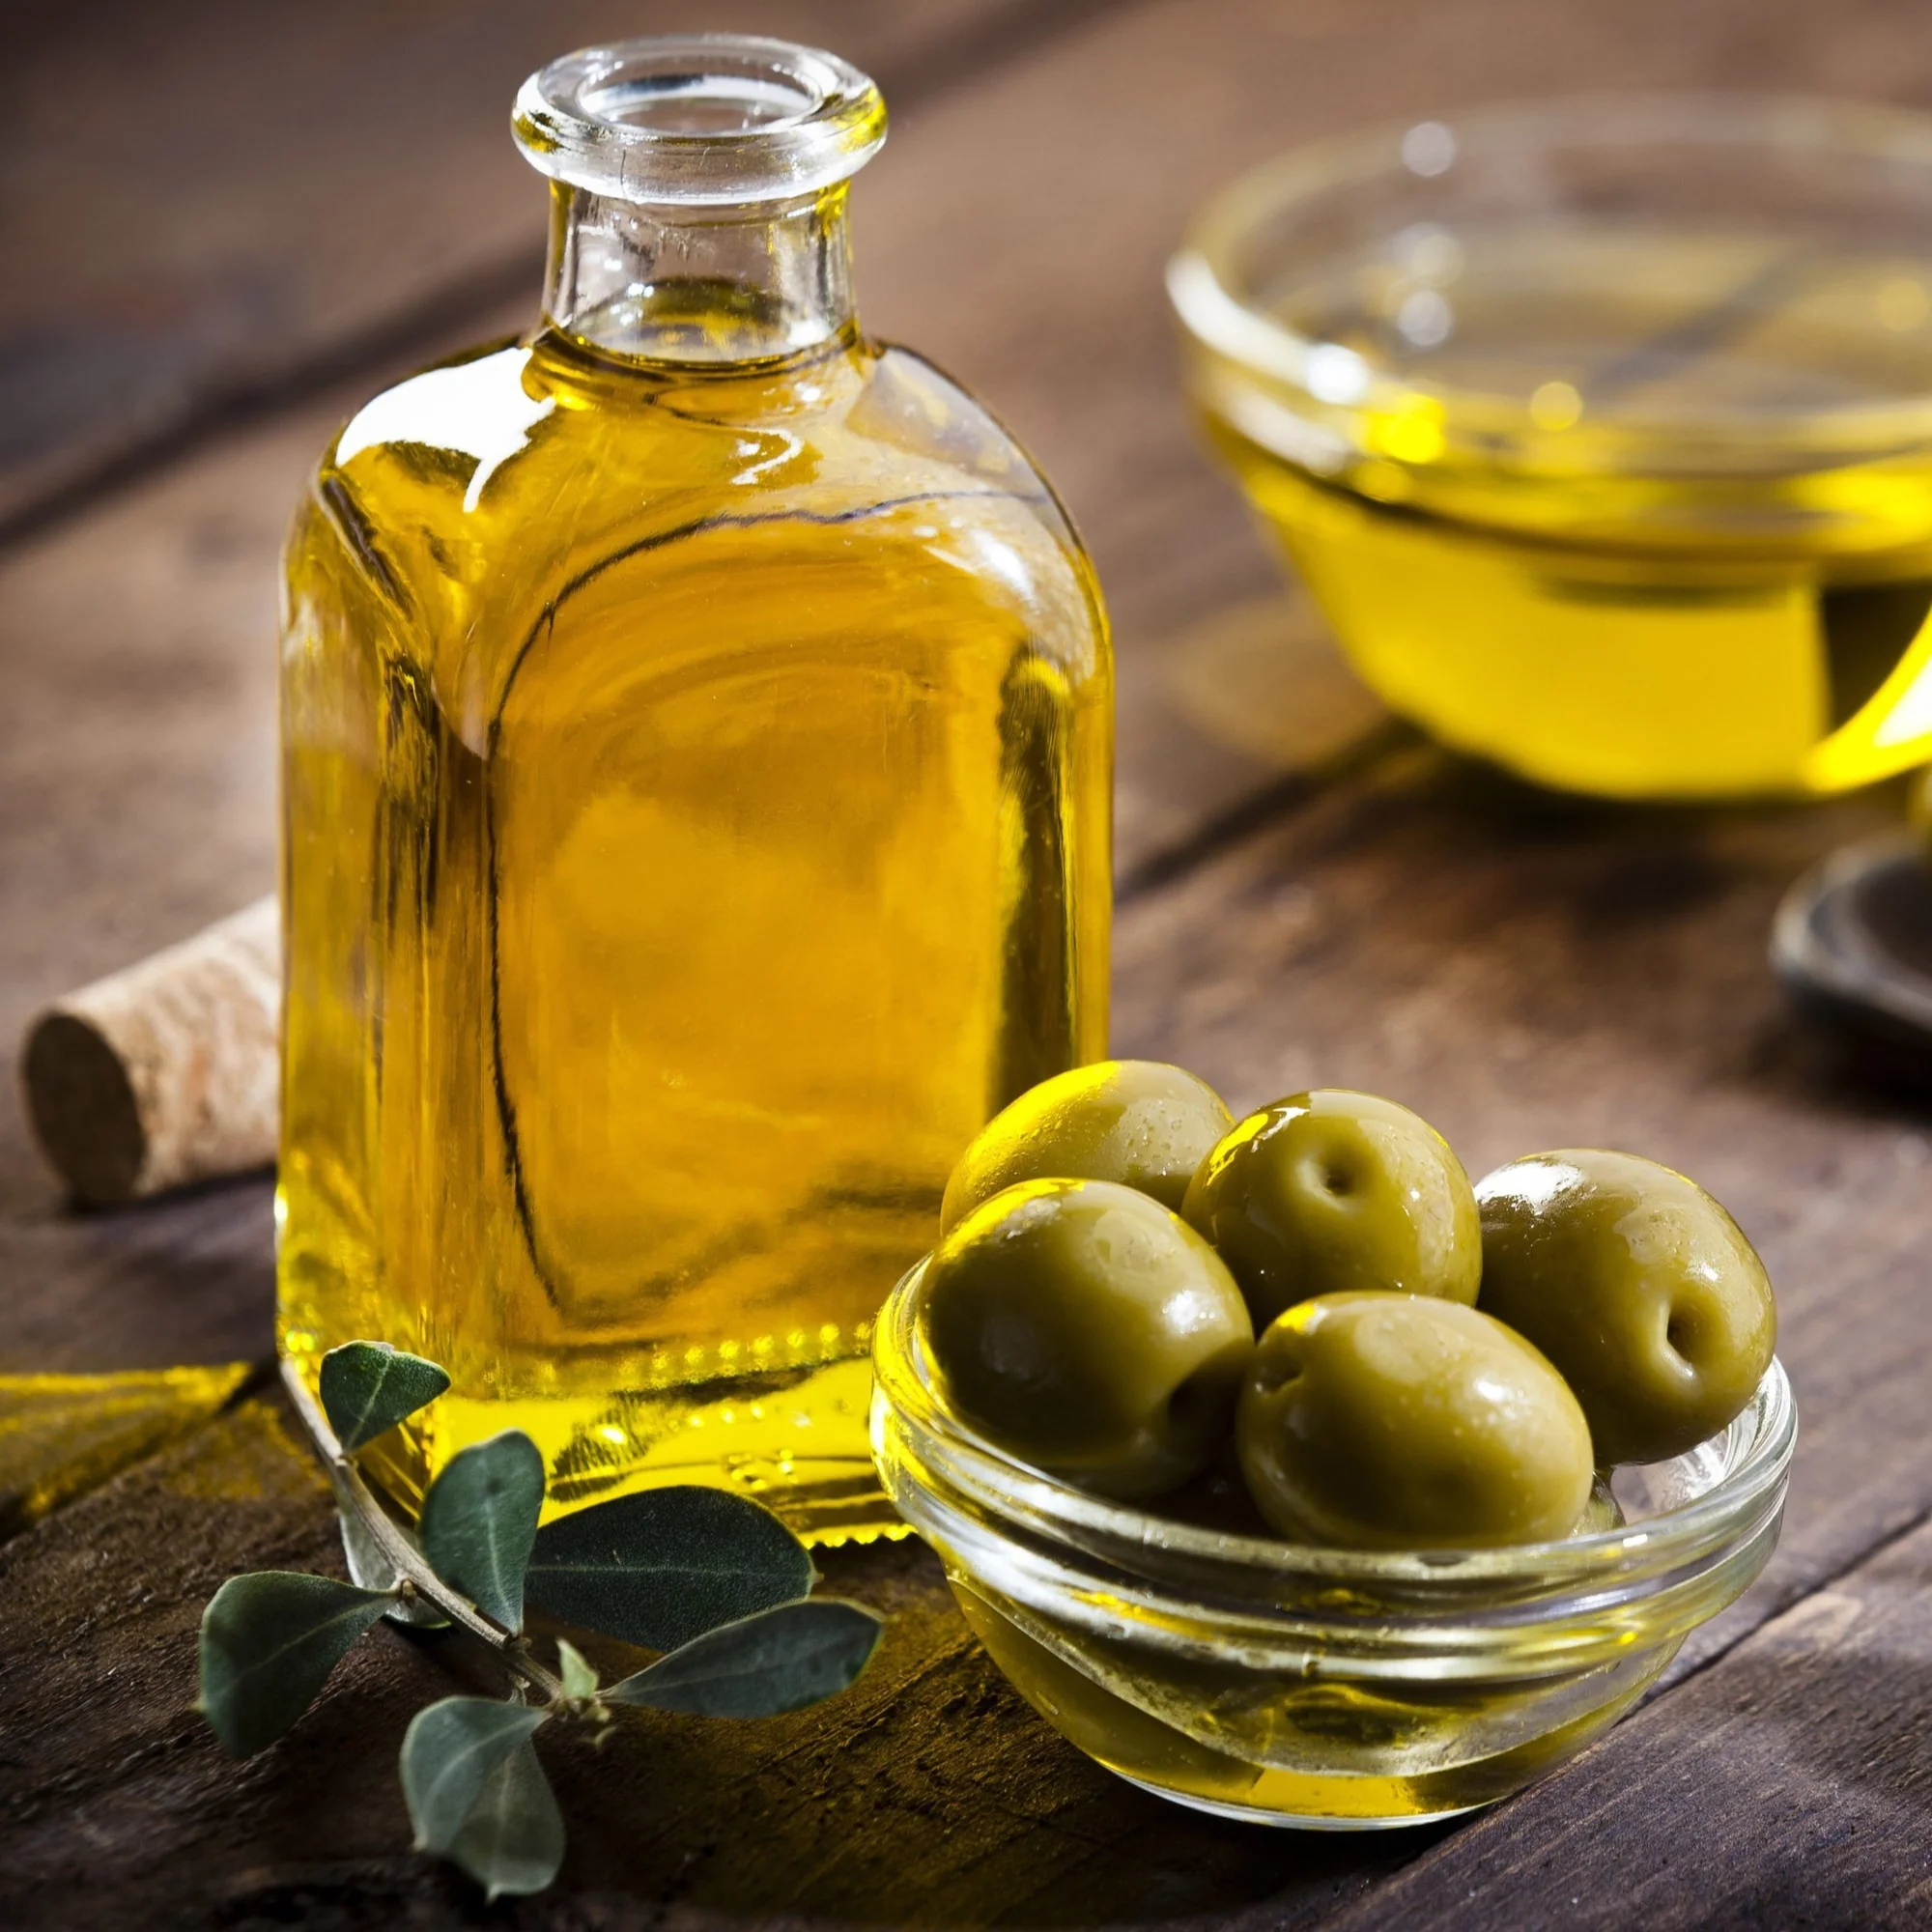 Organic Olives and Olive Oil: Nature’s Tiny Treasures